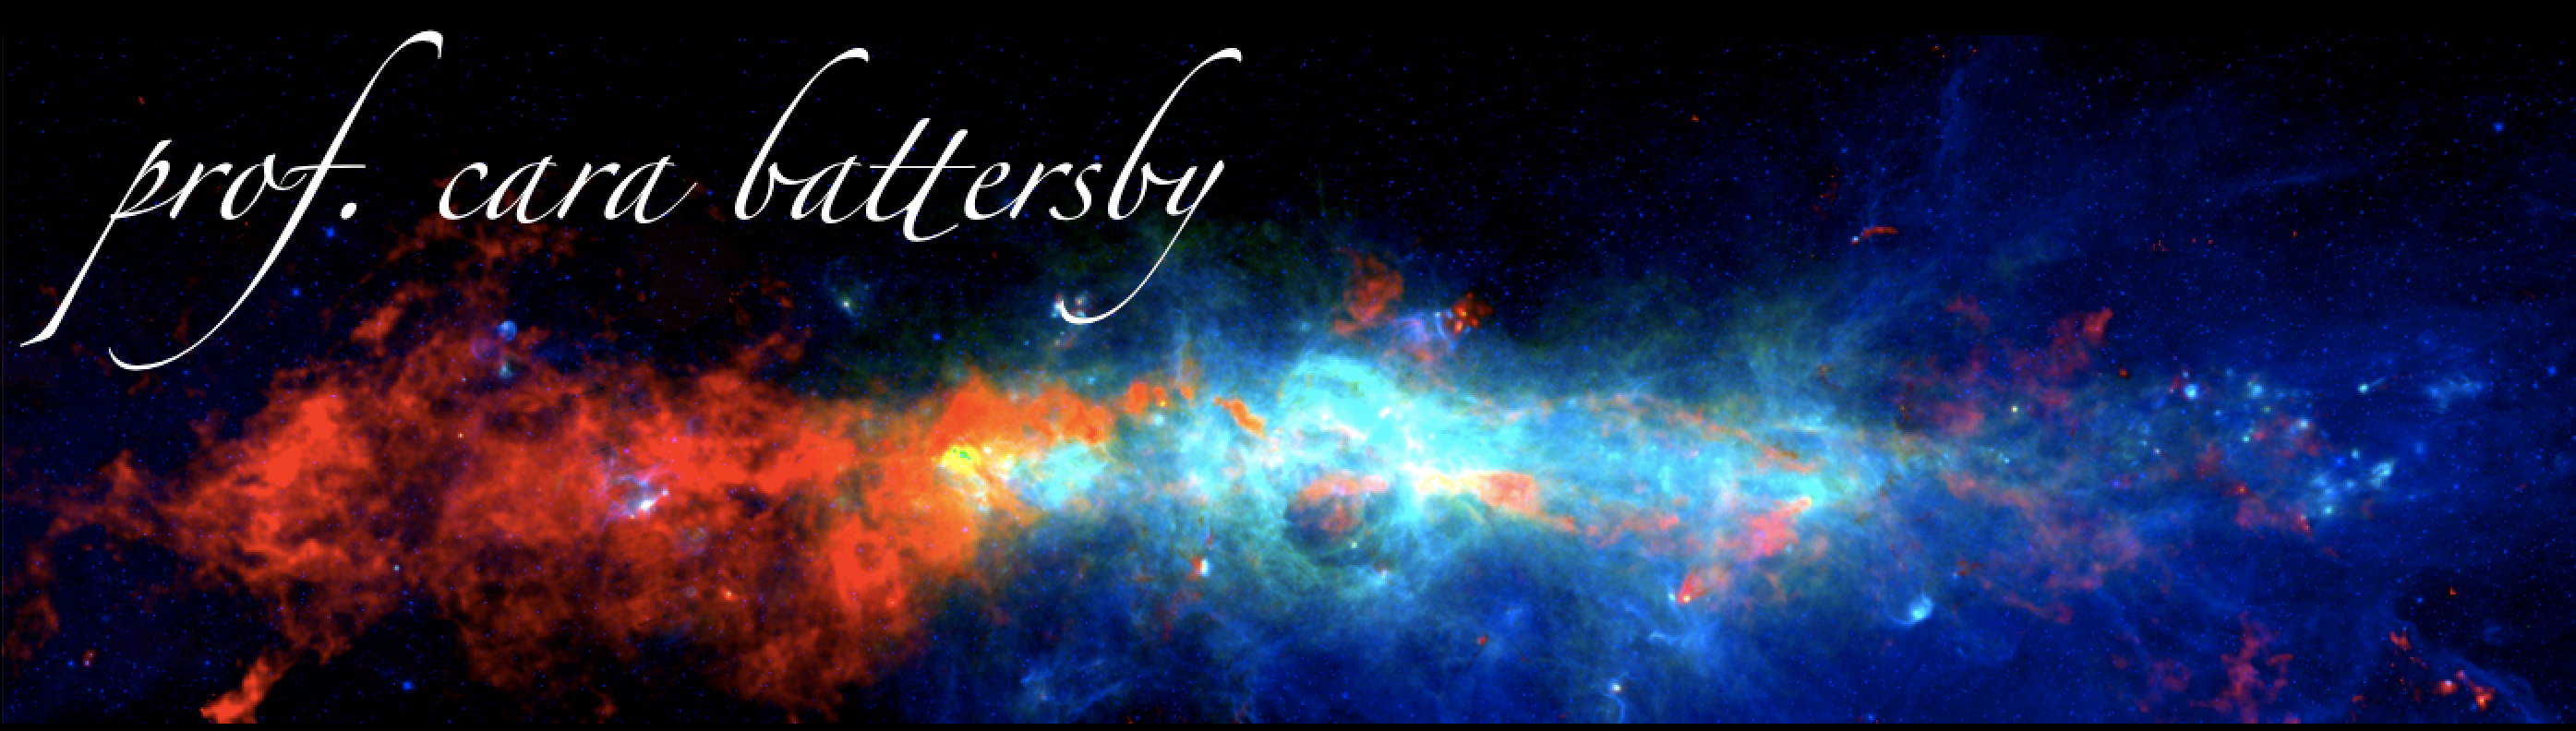 An image of the Central Molecular Zone in three colors from the Herschel space telescope with the words Professor Cara Battersby on top in script.